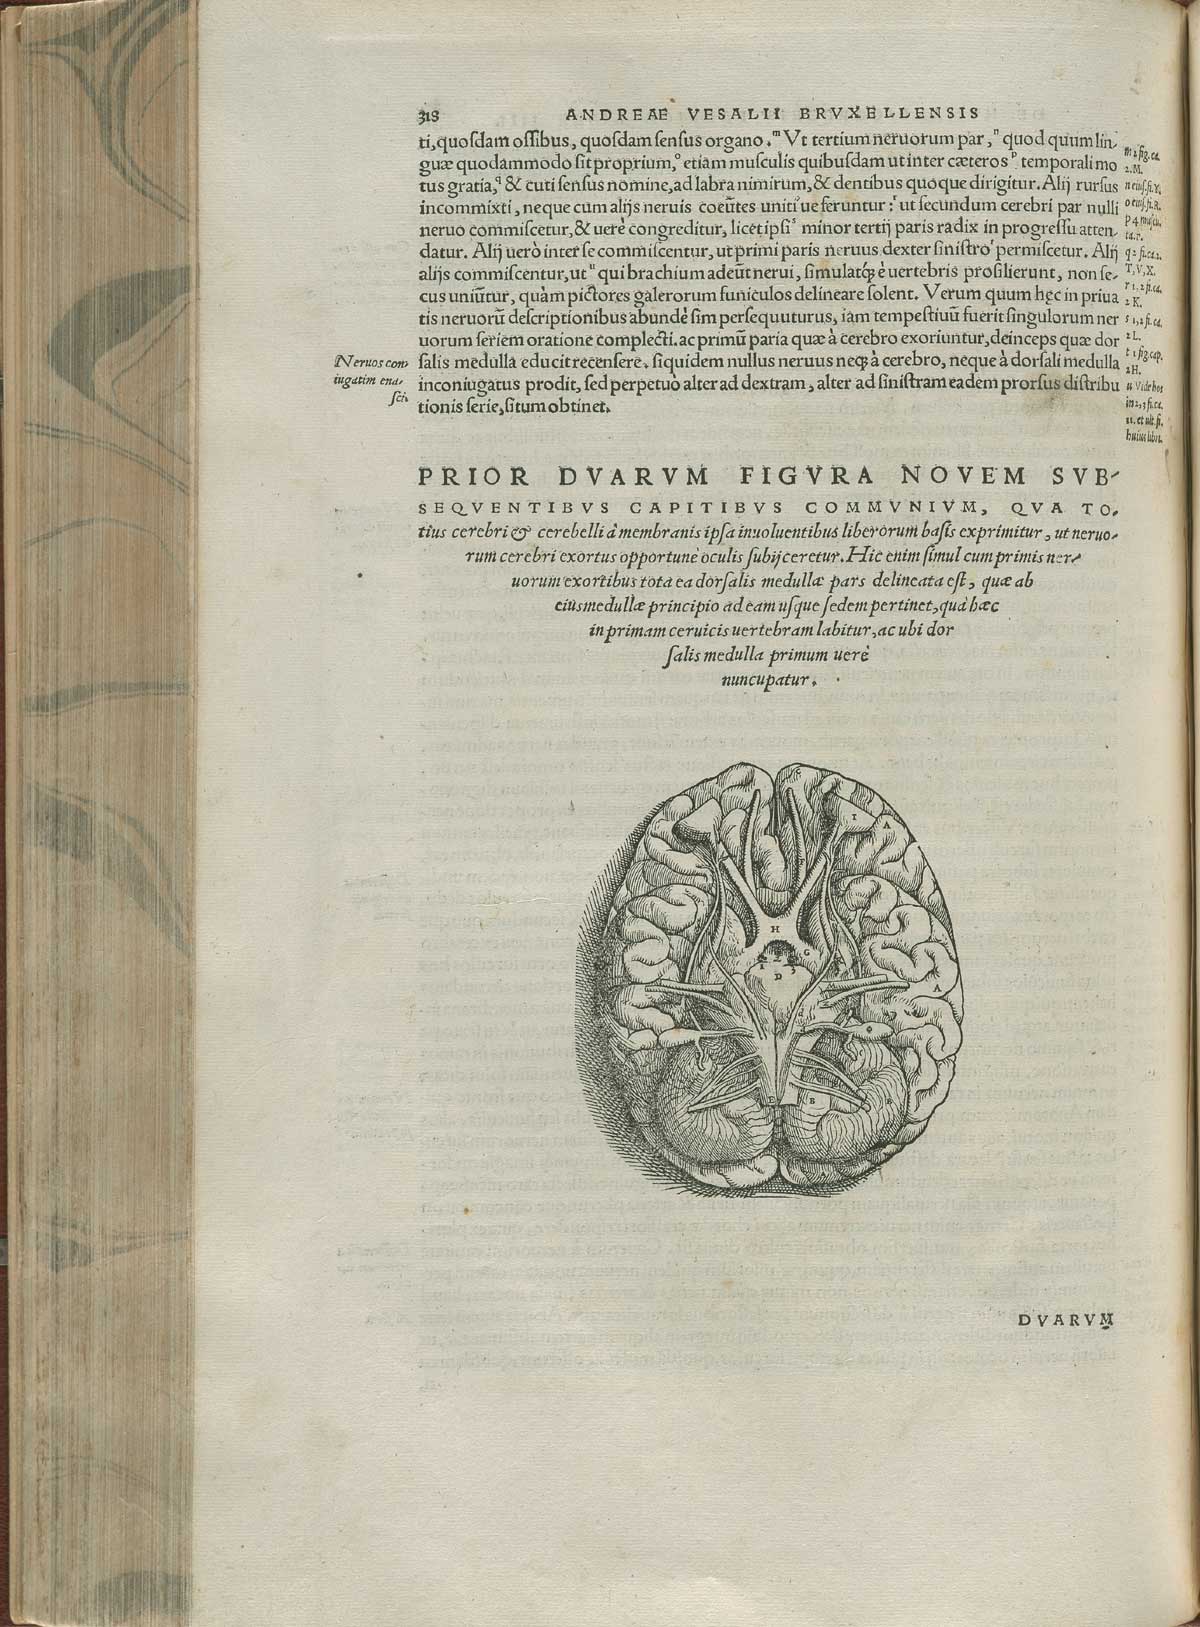 Page 418 of Andreas Vesalius' De corporis humani fabrica libri septem, featuring the illustrated woodcut of the basal view of the base of the brain and cranial nerves.